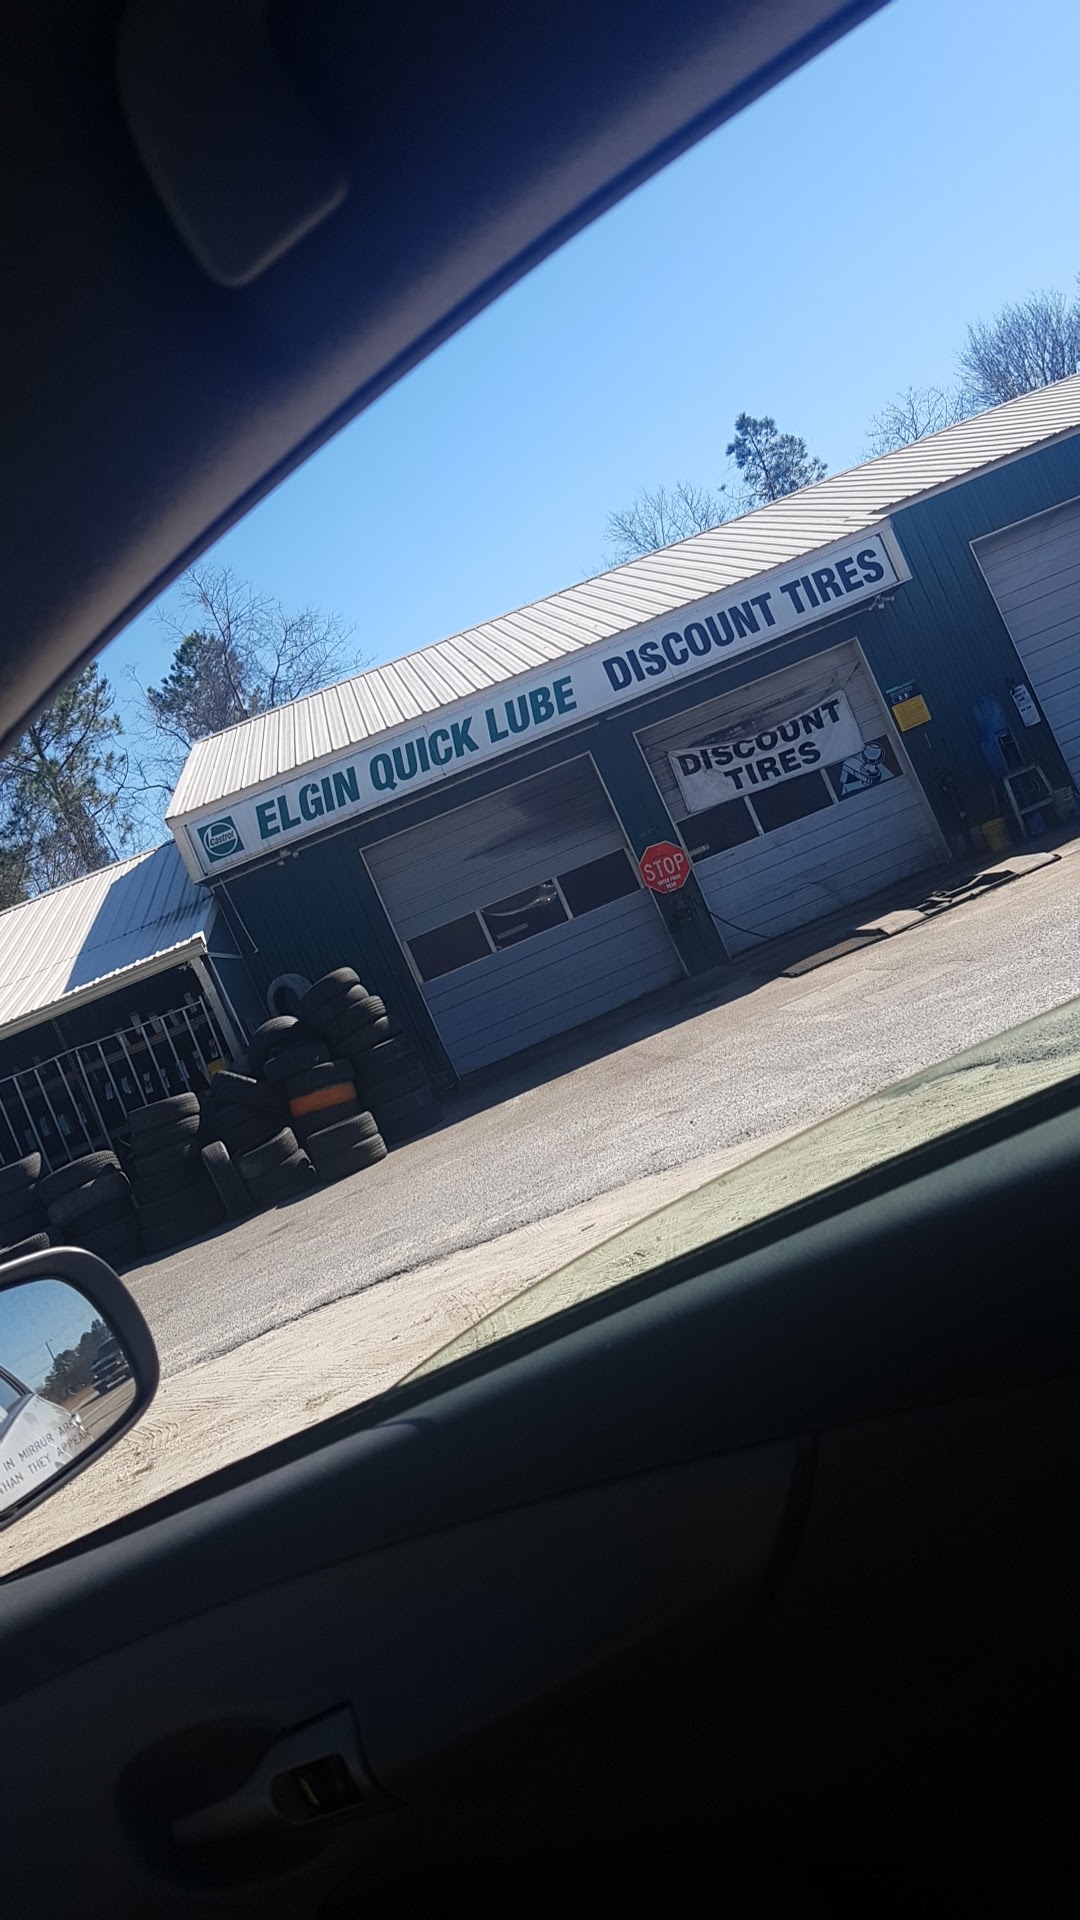 Elgin Quick Lube and Discount Tire